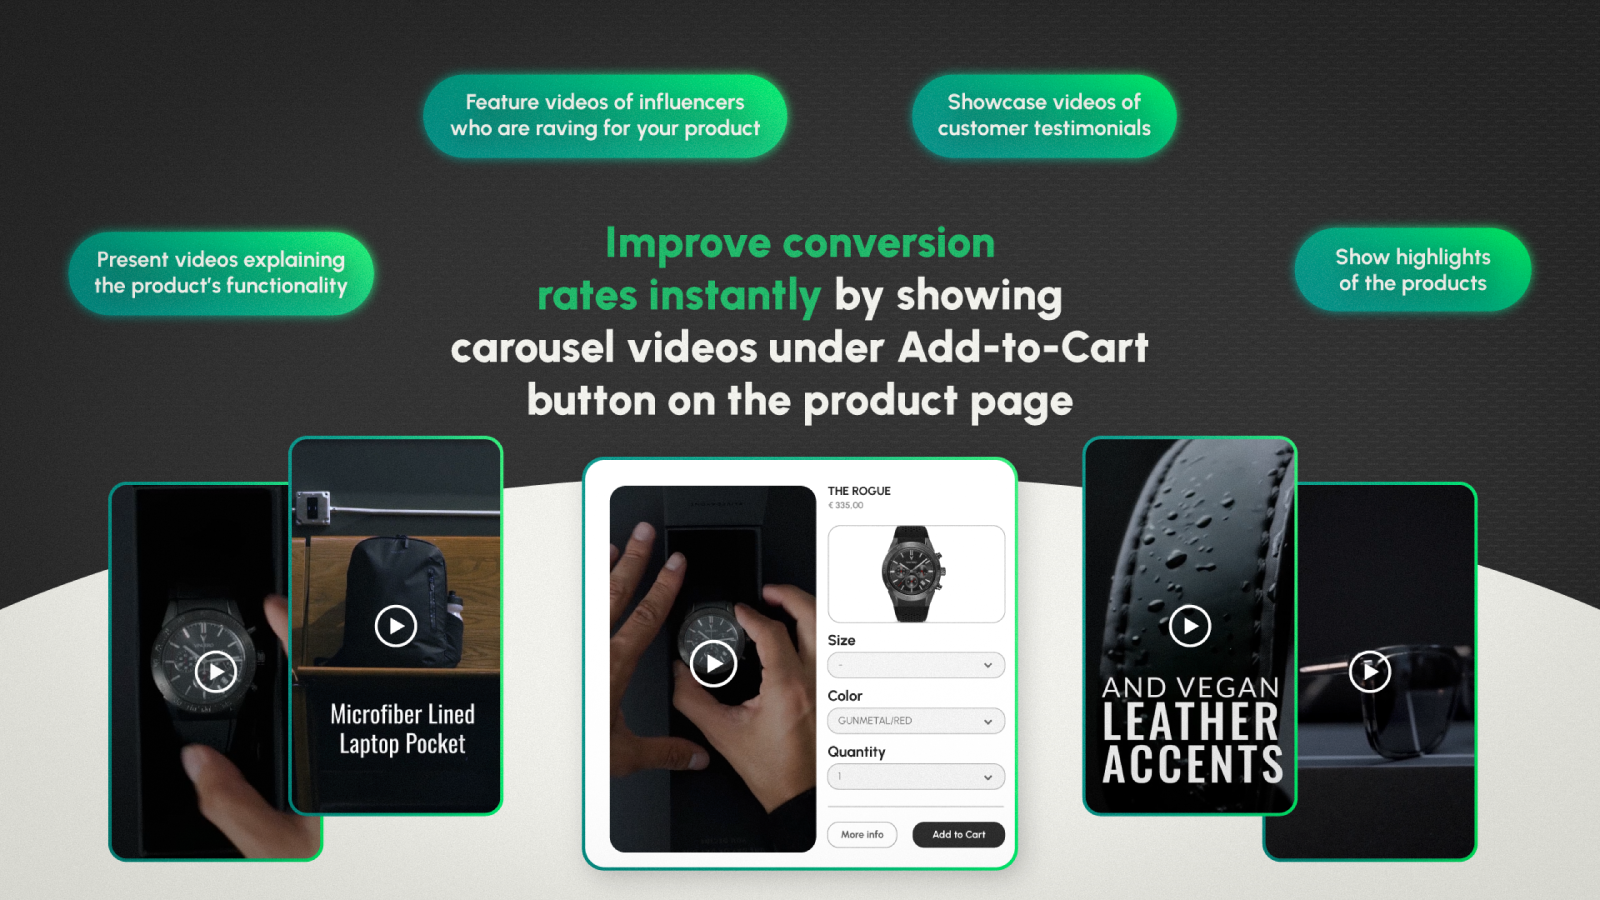 Improve conversion rates instantly by showing carousel videos